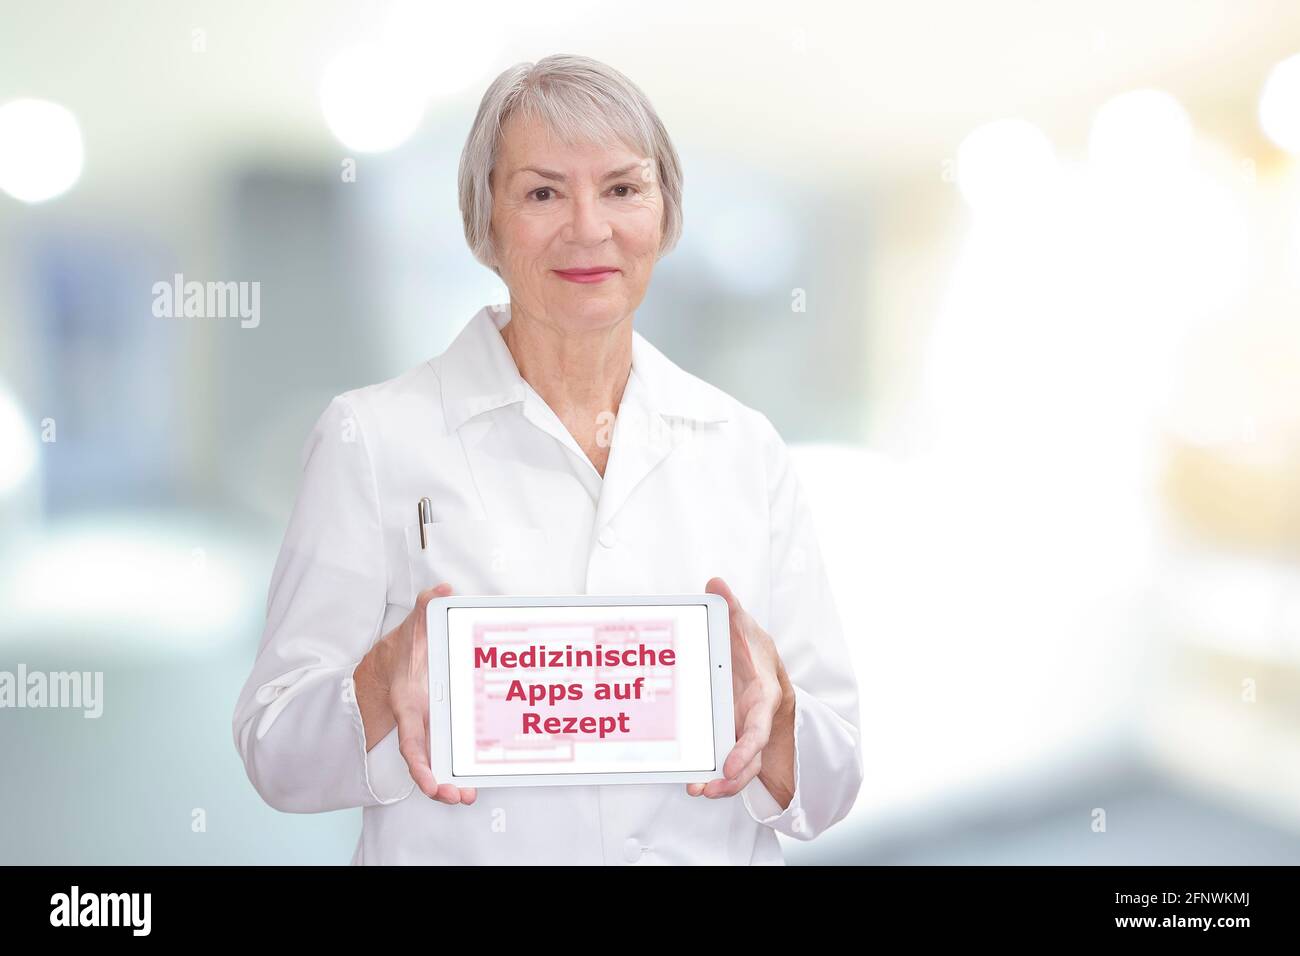 Senior doctor showing a tablet computer with the german text: Medizinische Apps auf Rezept. Translation: medicinal apps on prescription. Stock Photo